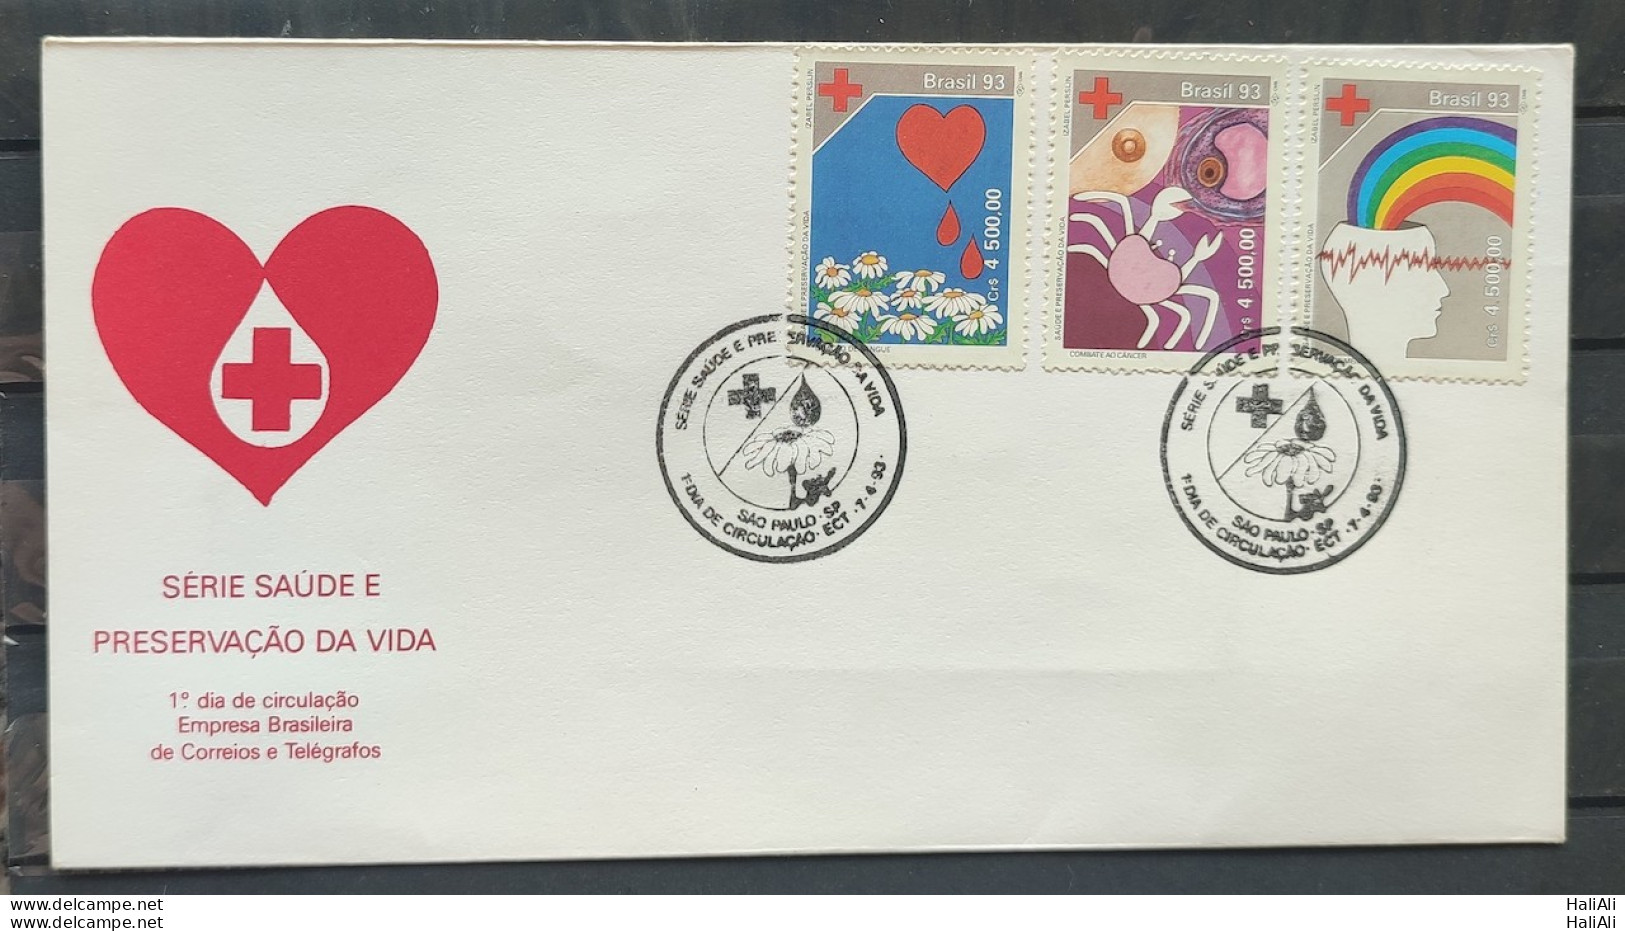 Brazil Envelope FDC 585 1993 Health Preservation Of Life Heart Cbc Sp - FDC